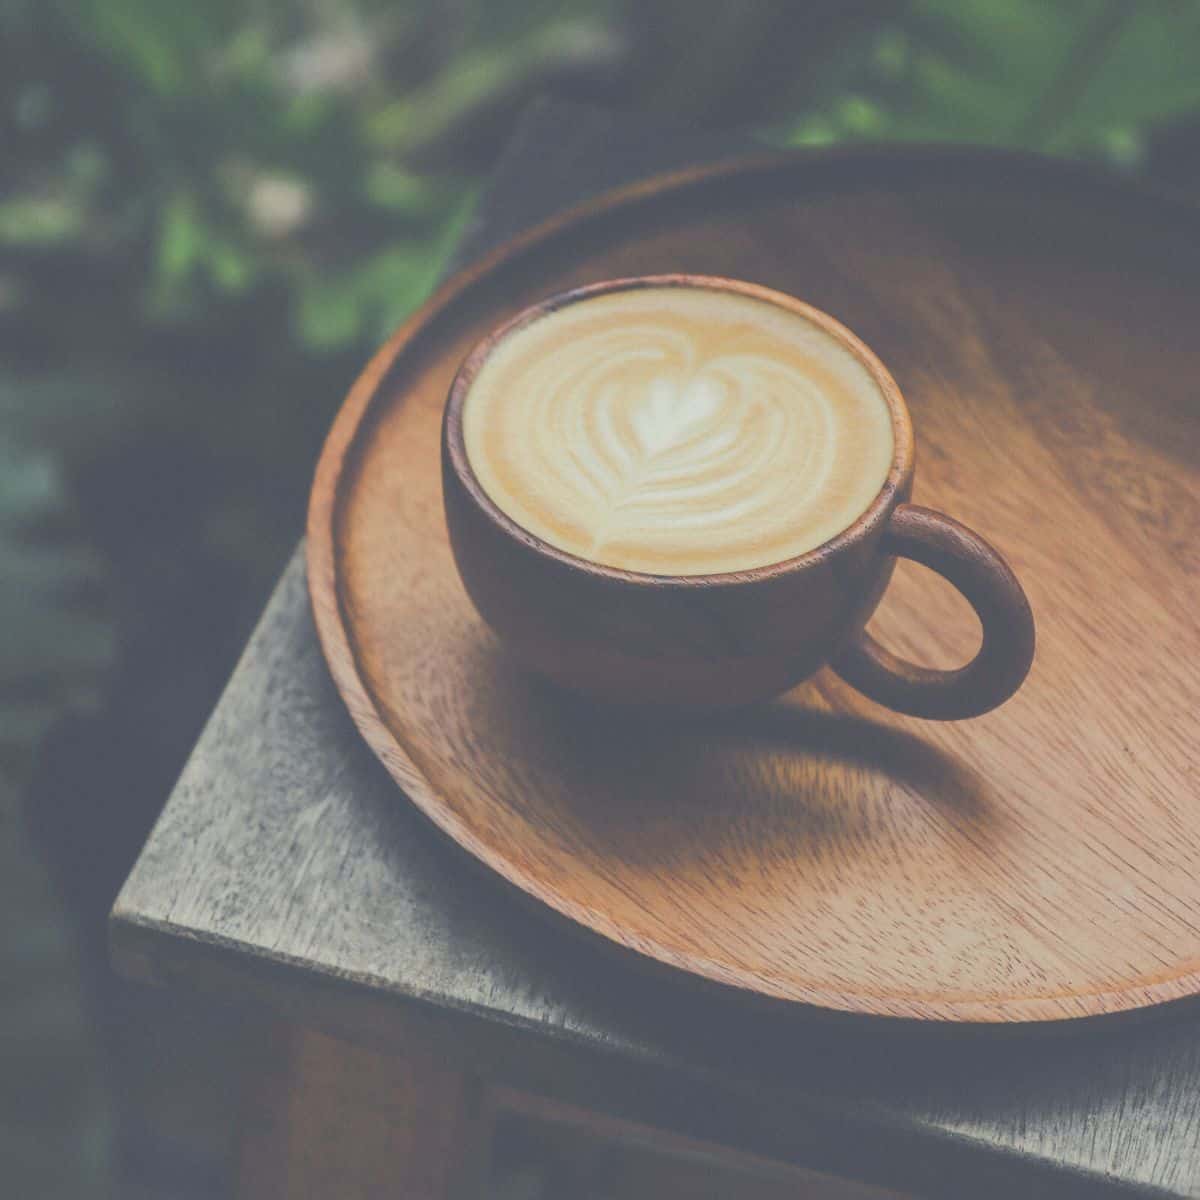 A cup of coffee on a wooden tray.